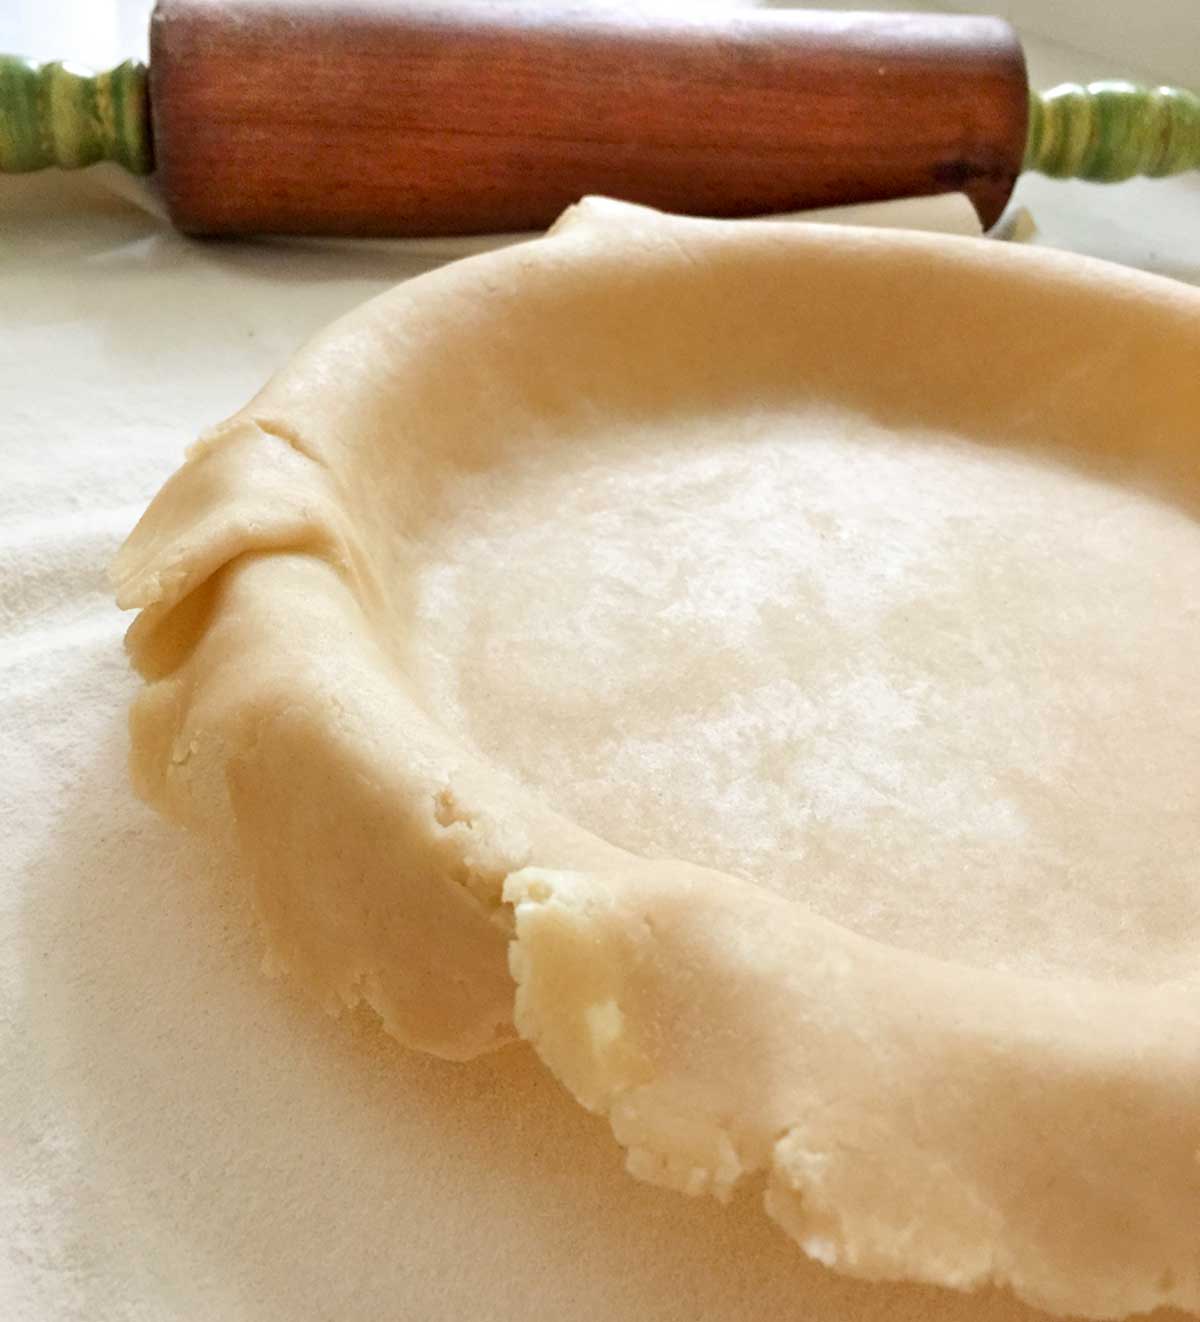 An all-butter pie crust laying in a pie pan with a rolling pin beside it.